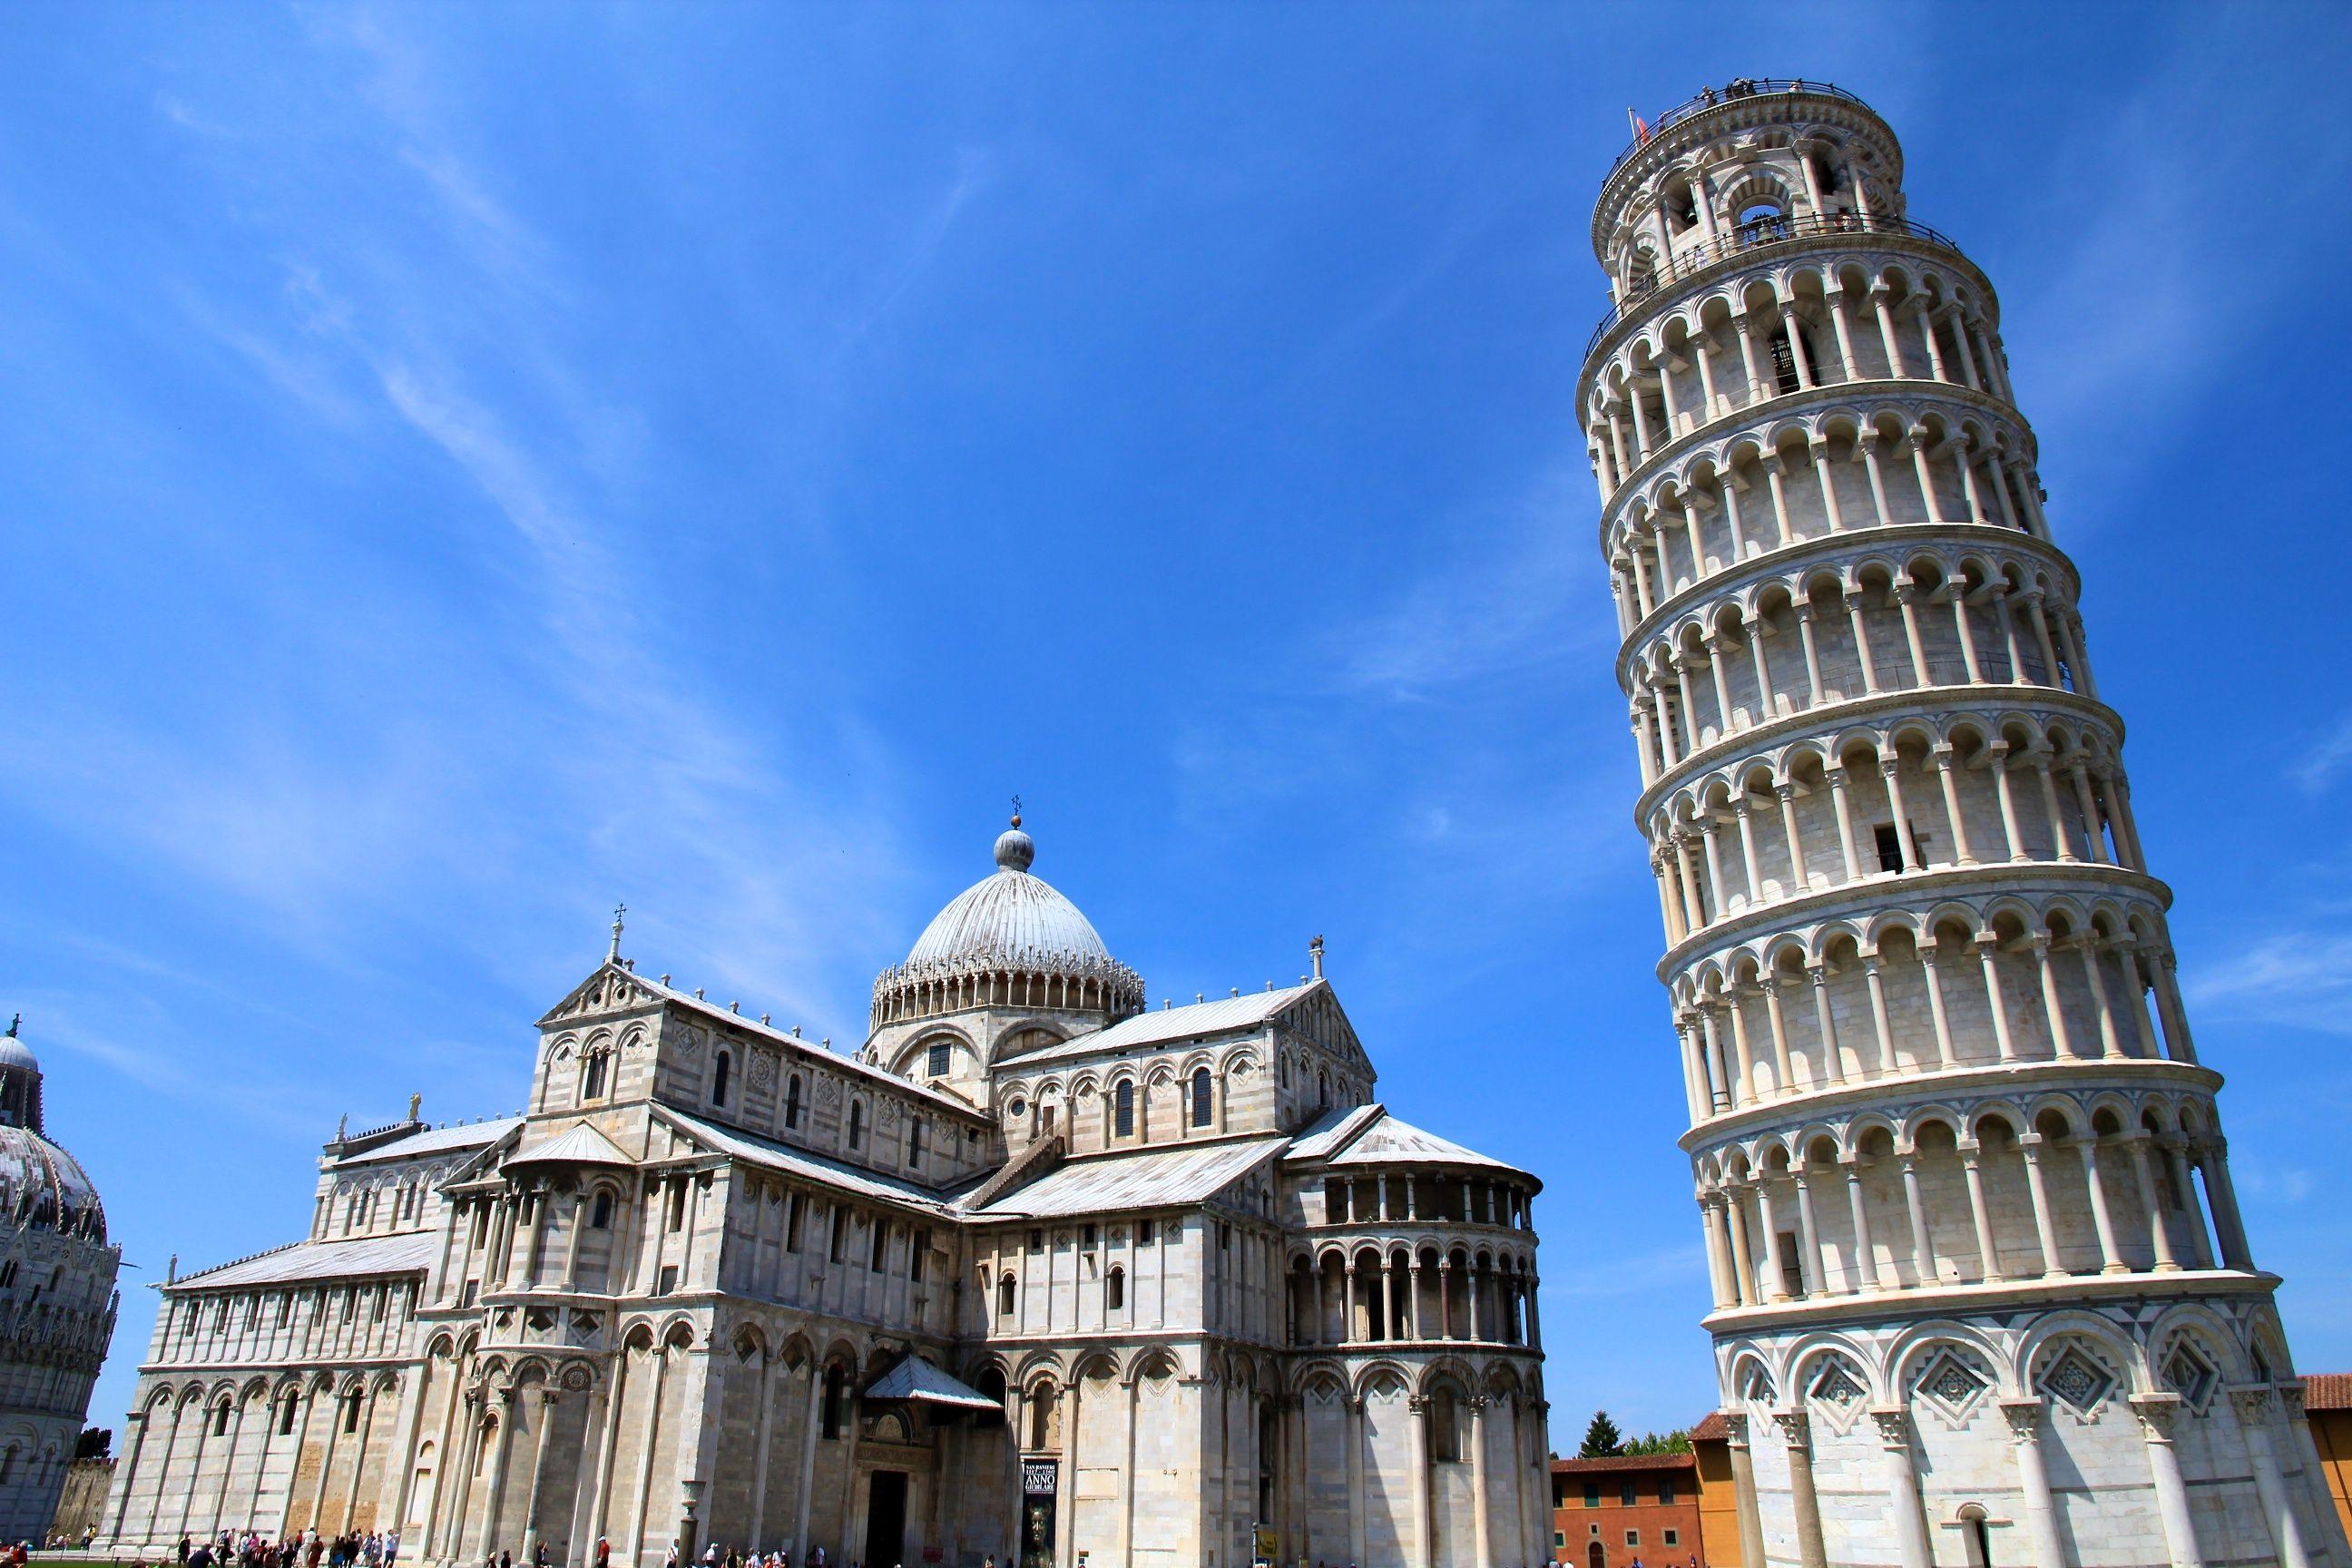 2592x1728px Leaning Tower Of Pisa 1278.55 KB